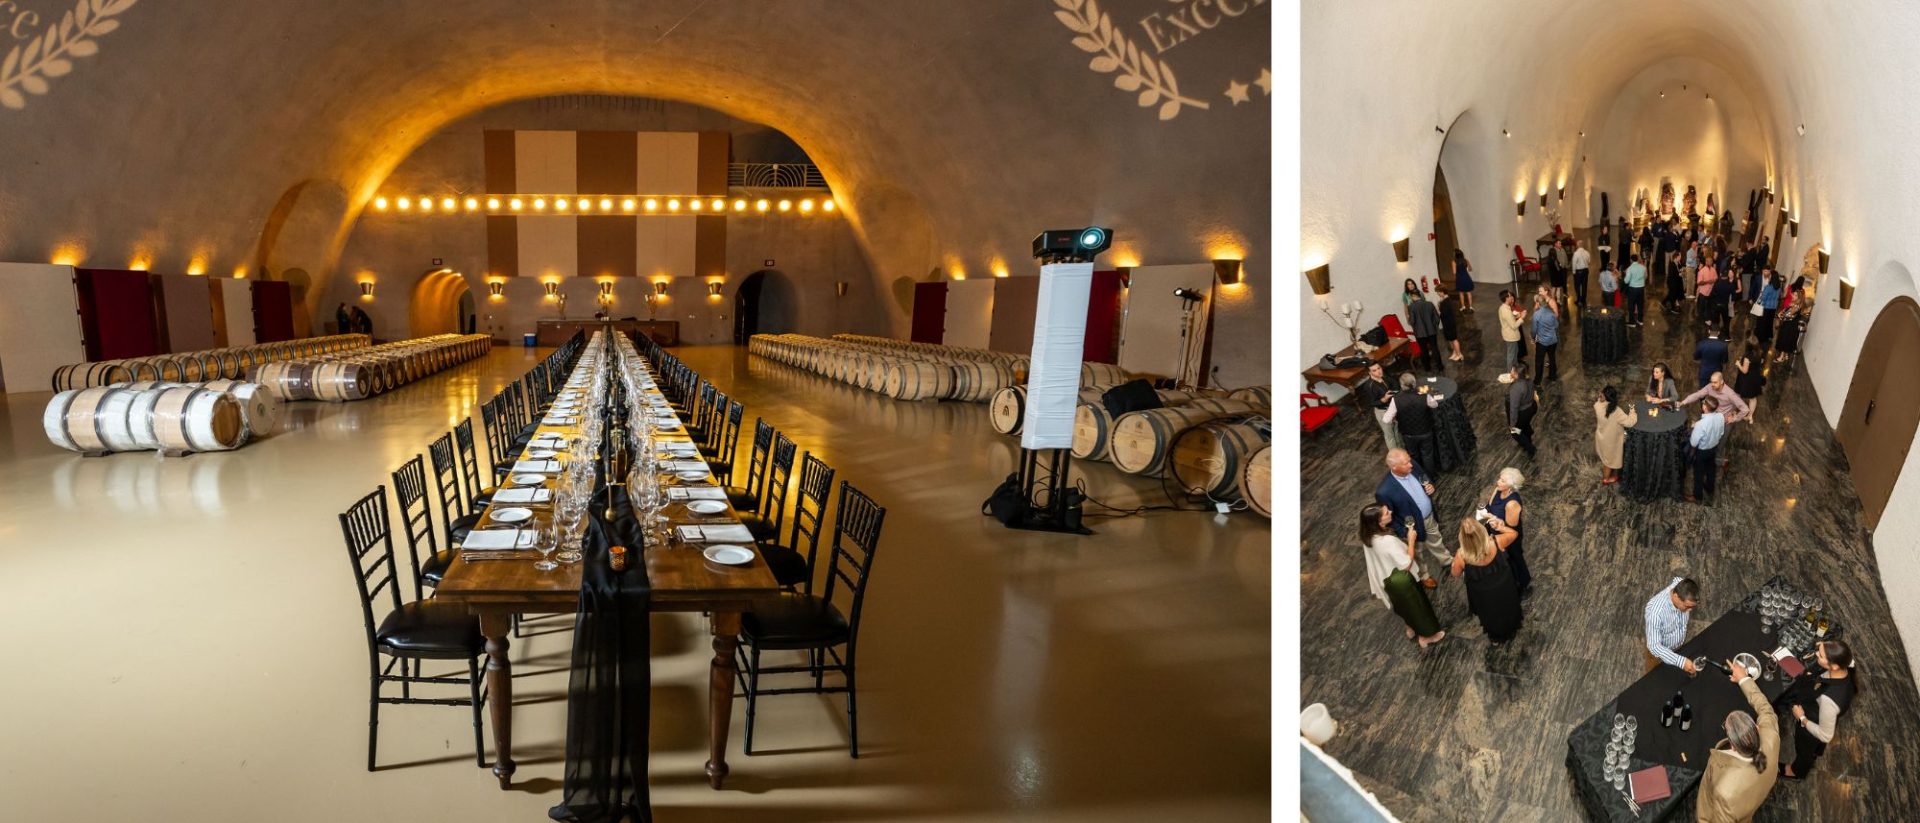 Two pictures of a wine tasting in a wine cellar.